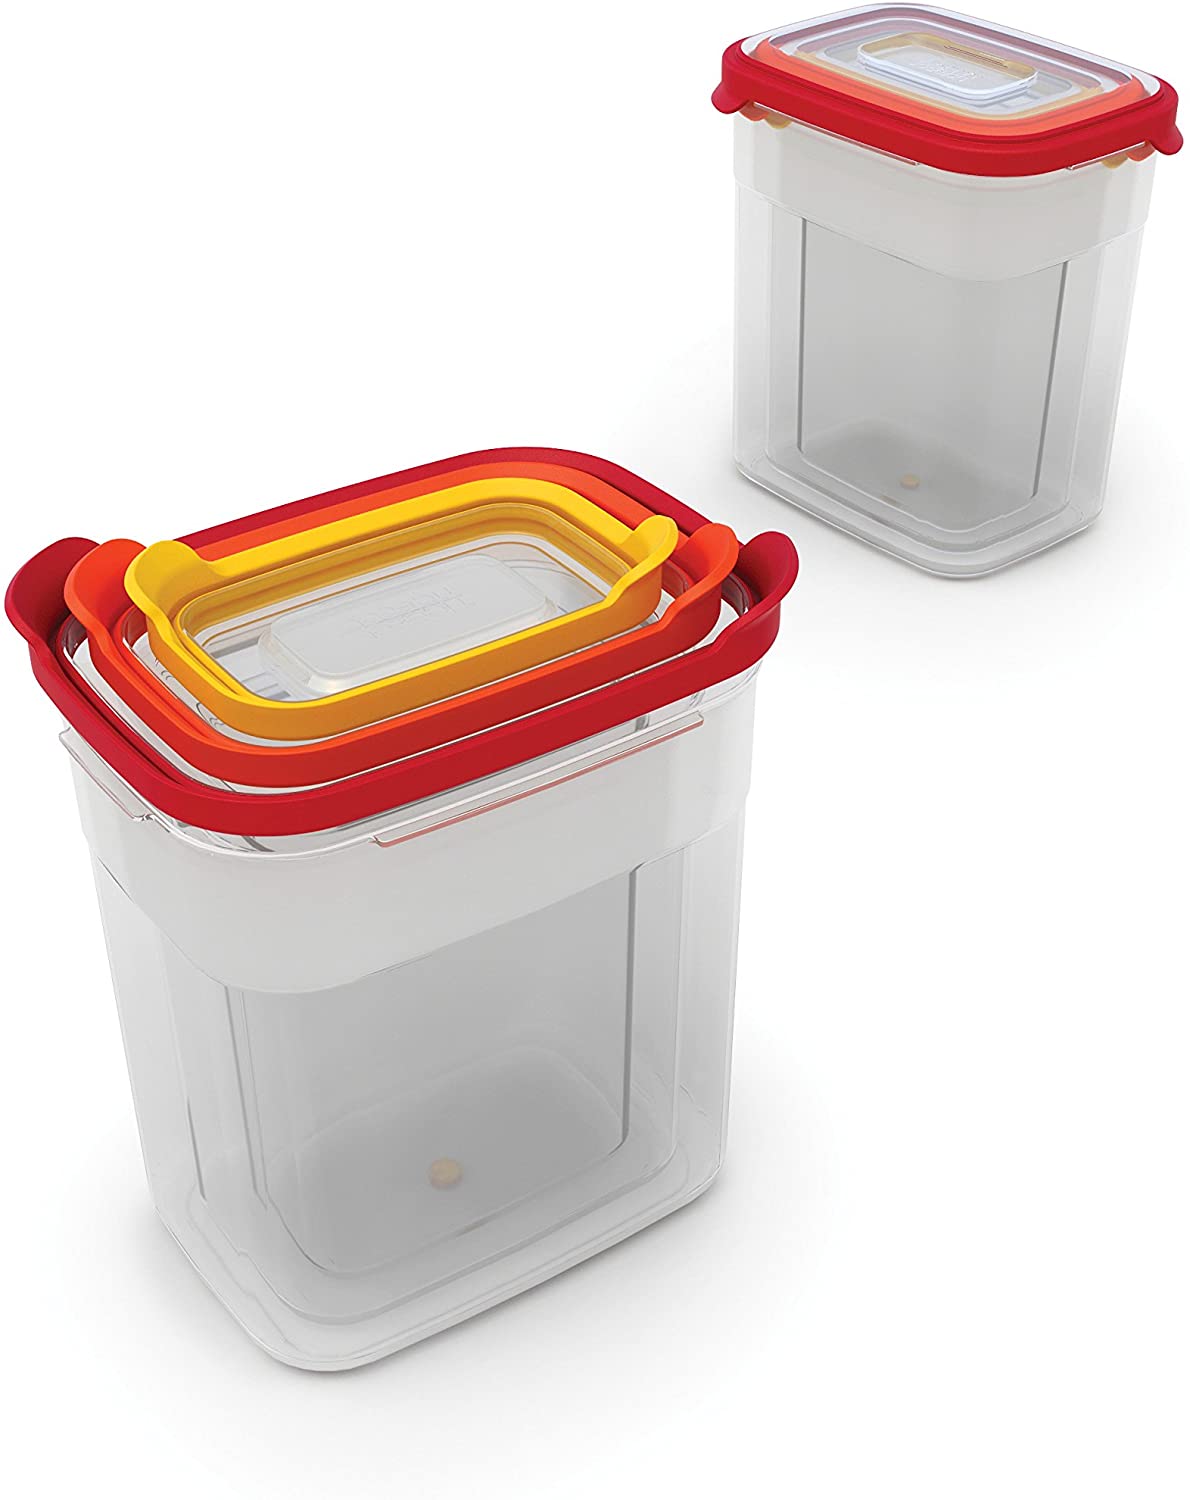 Joseph Joseph Tall Stackable Compact Containers, Set of 3